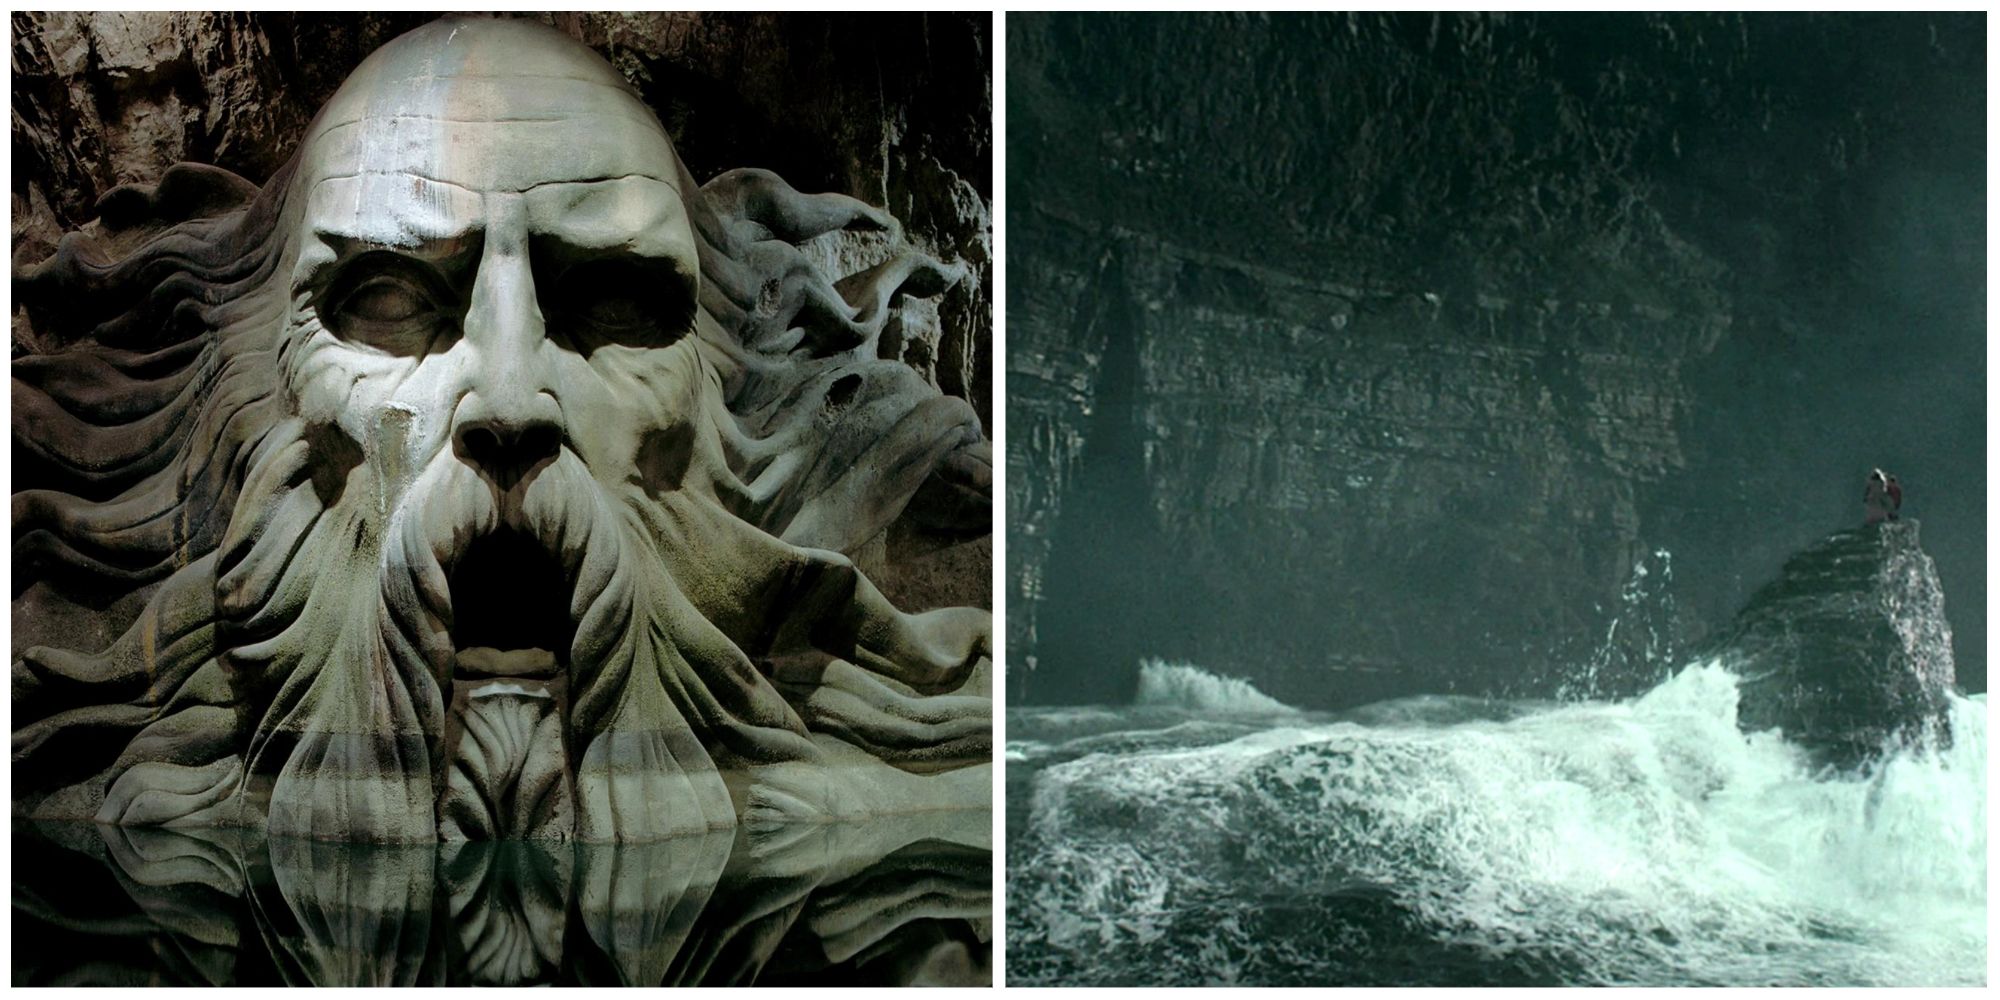 The Chamber of Secrets and the Cave in Harry Potter